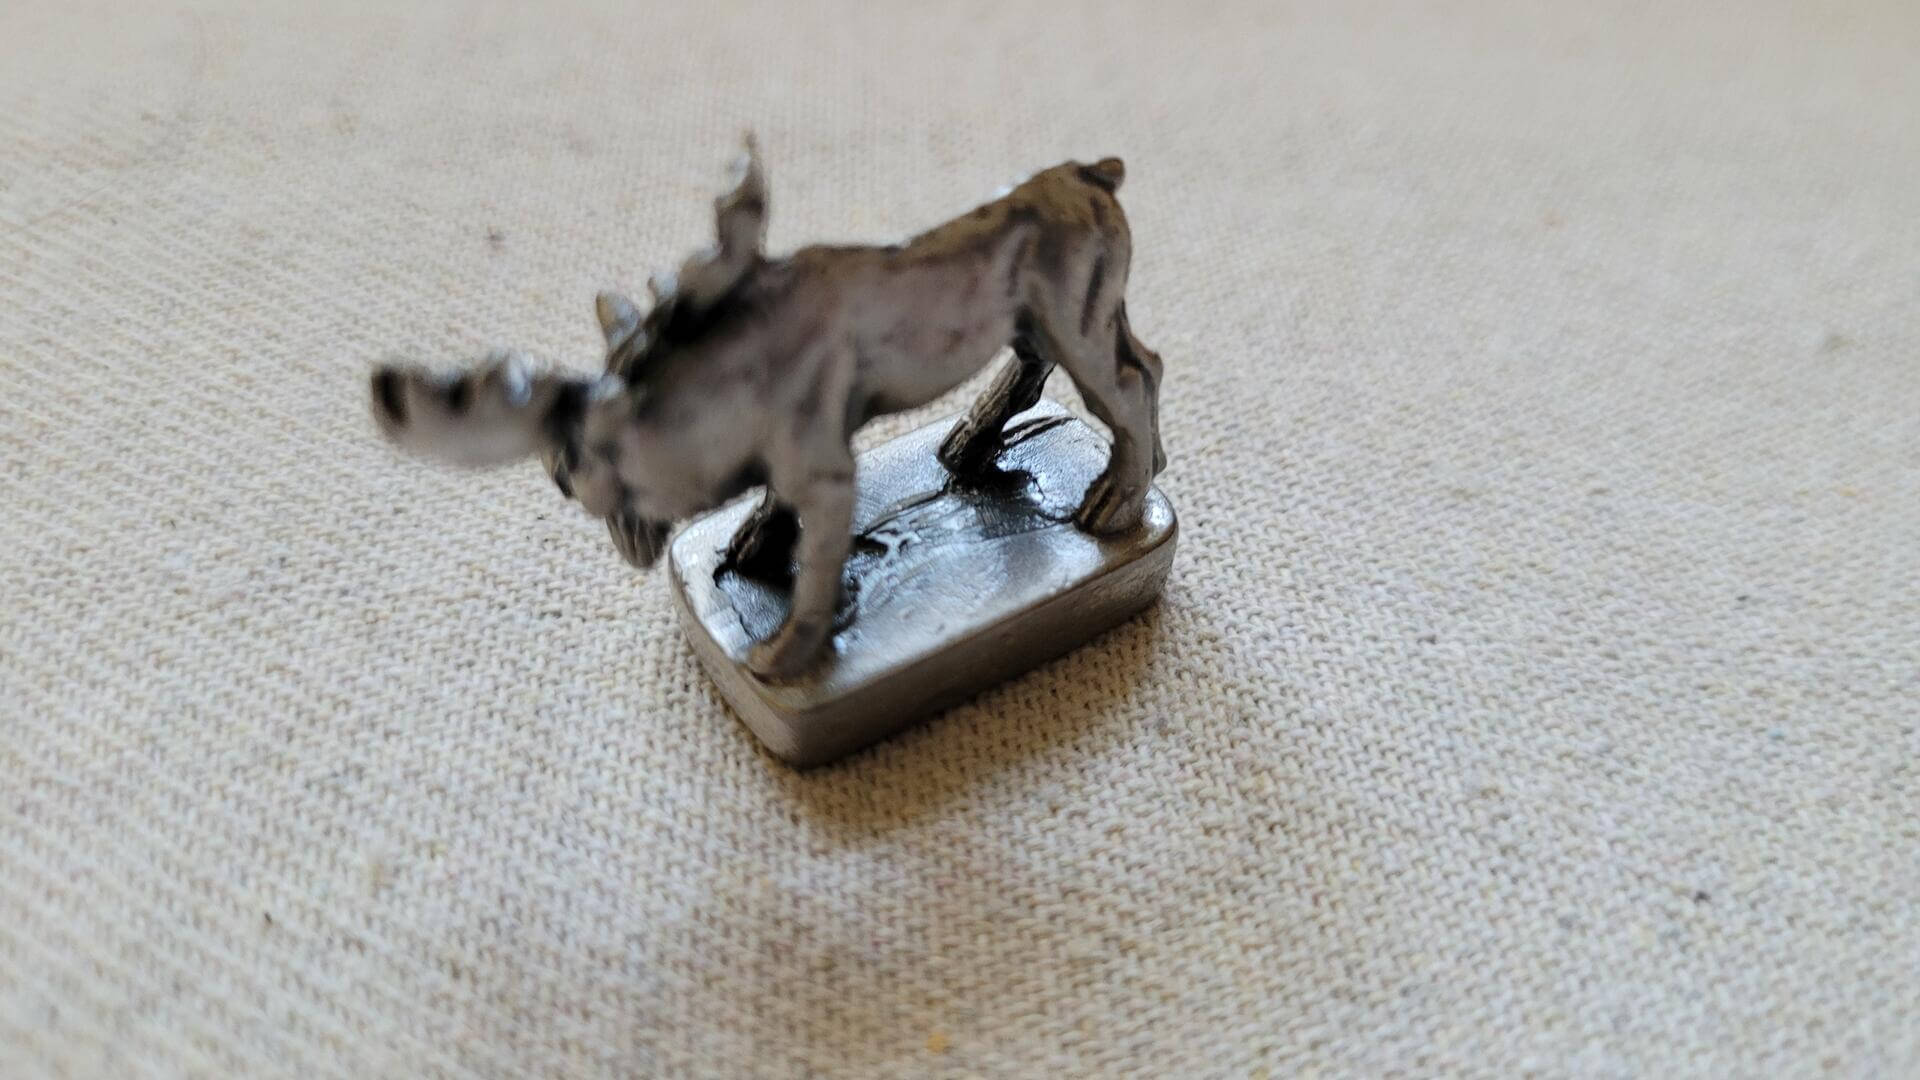 Miniature vintage pewter casting moose figurine sculpture one inch small with Canada engraving on the base